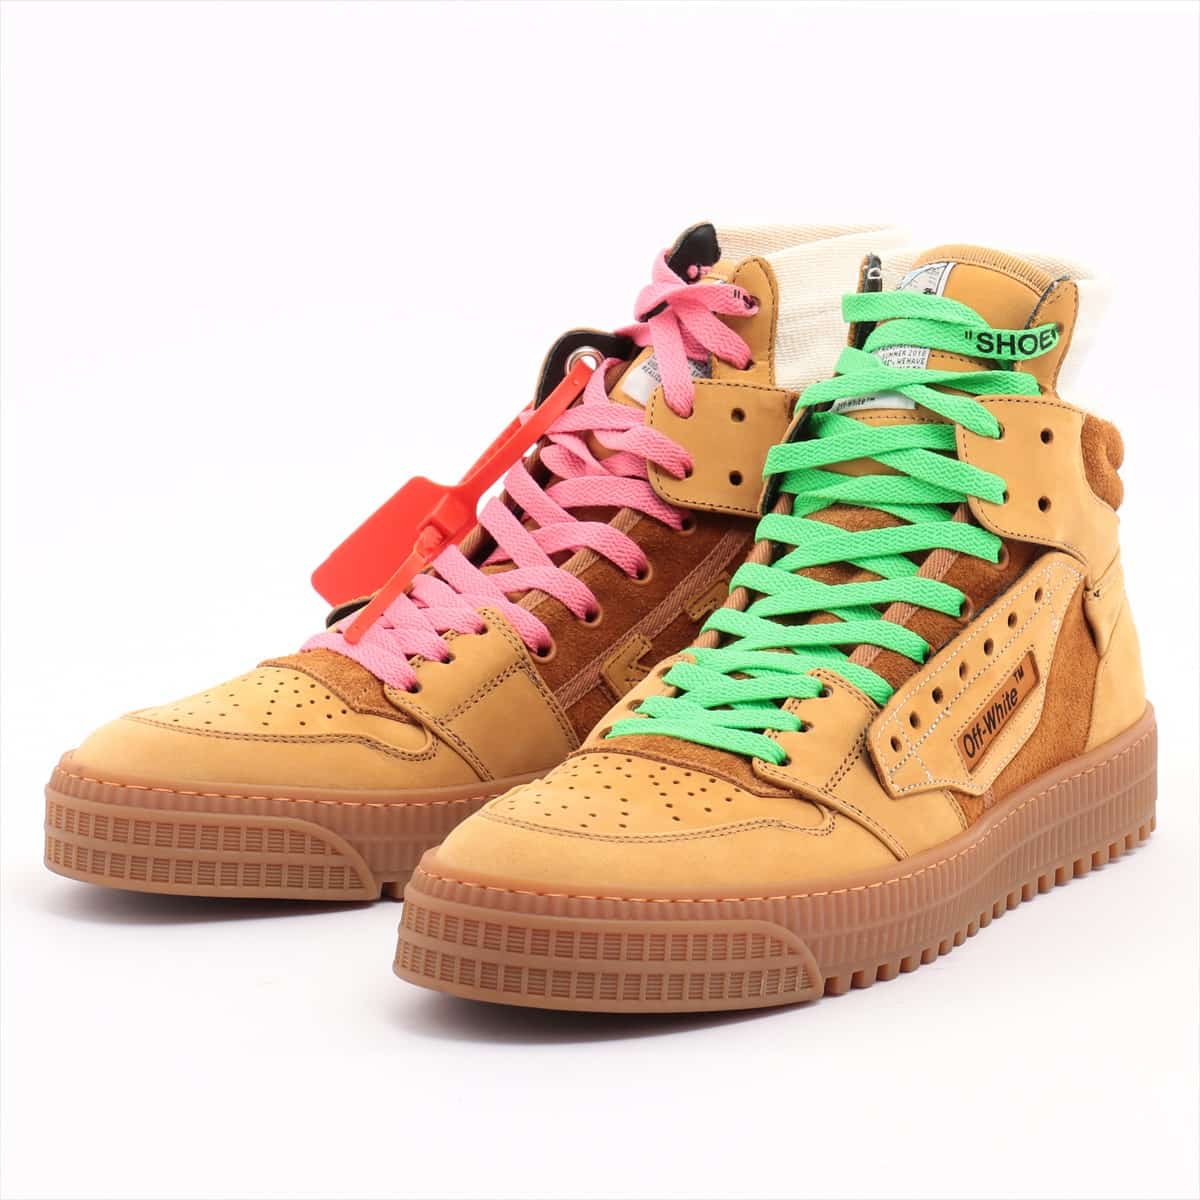 Off-White Leather High-top Sneakers 42 Men's Brown